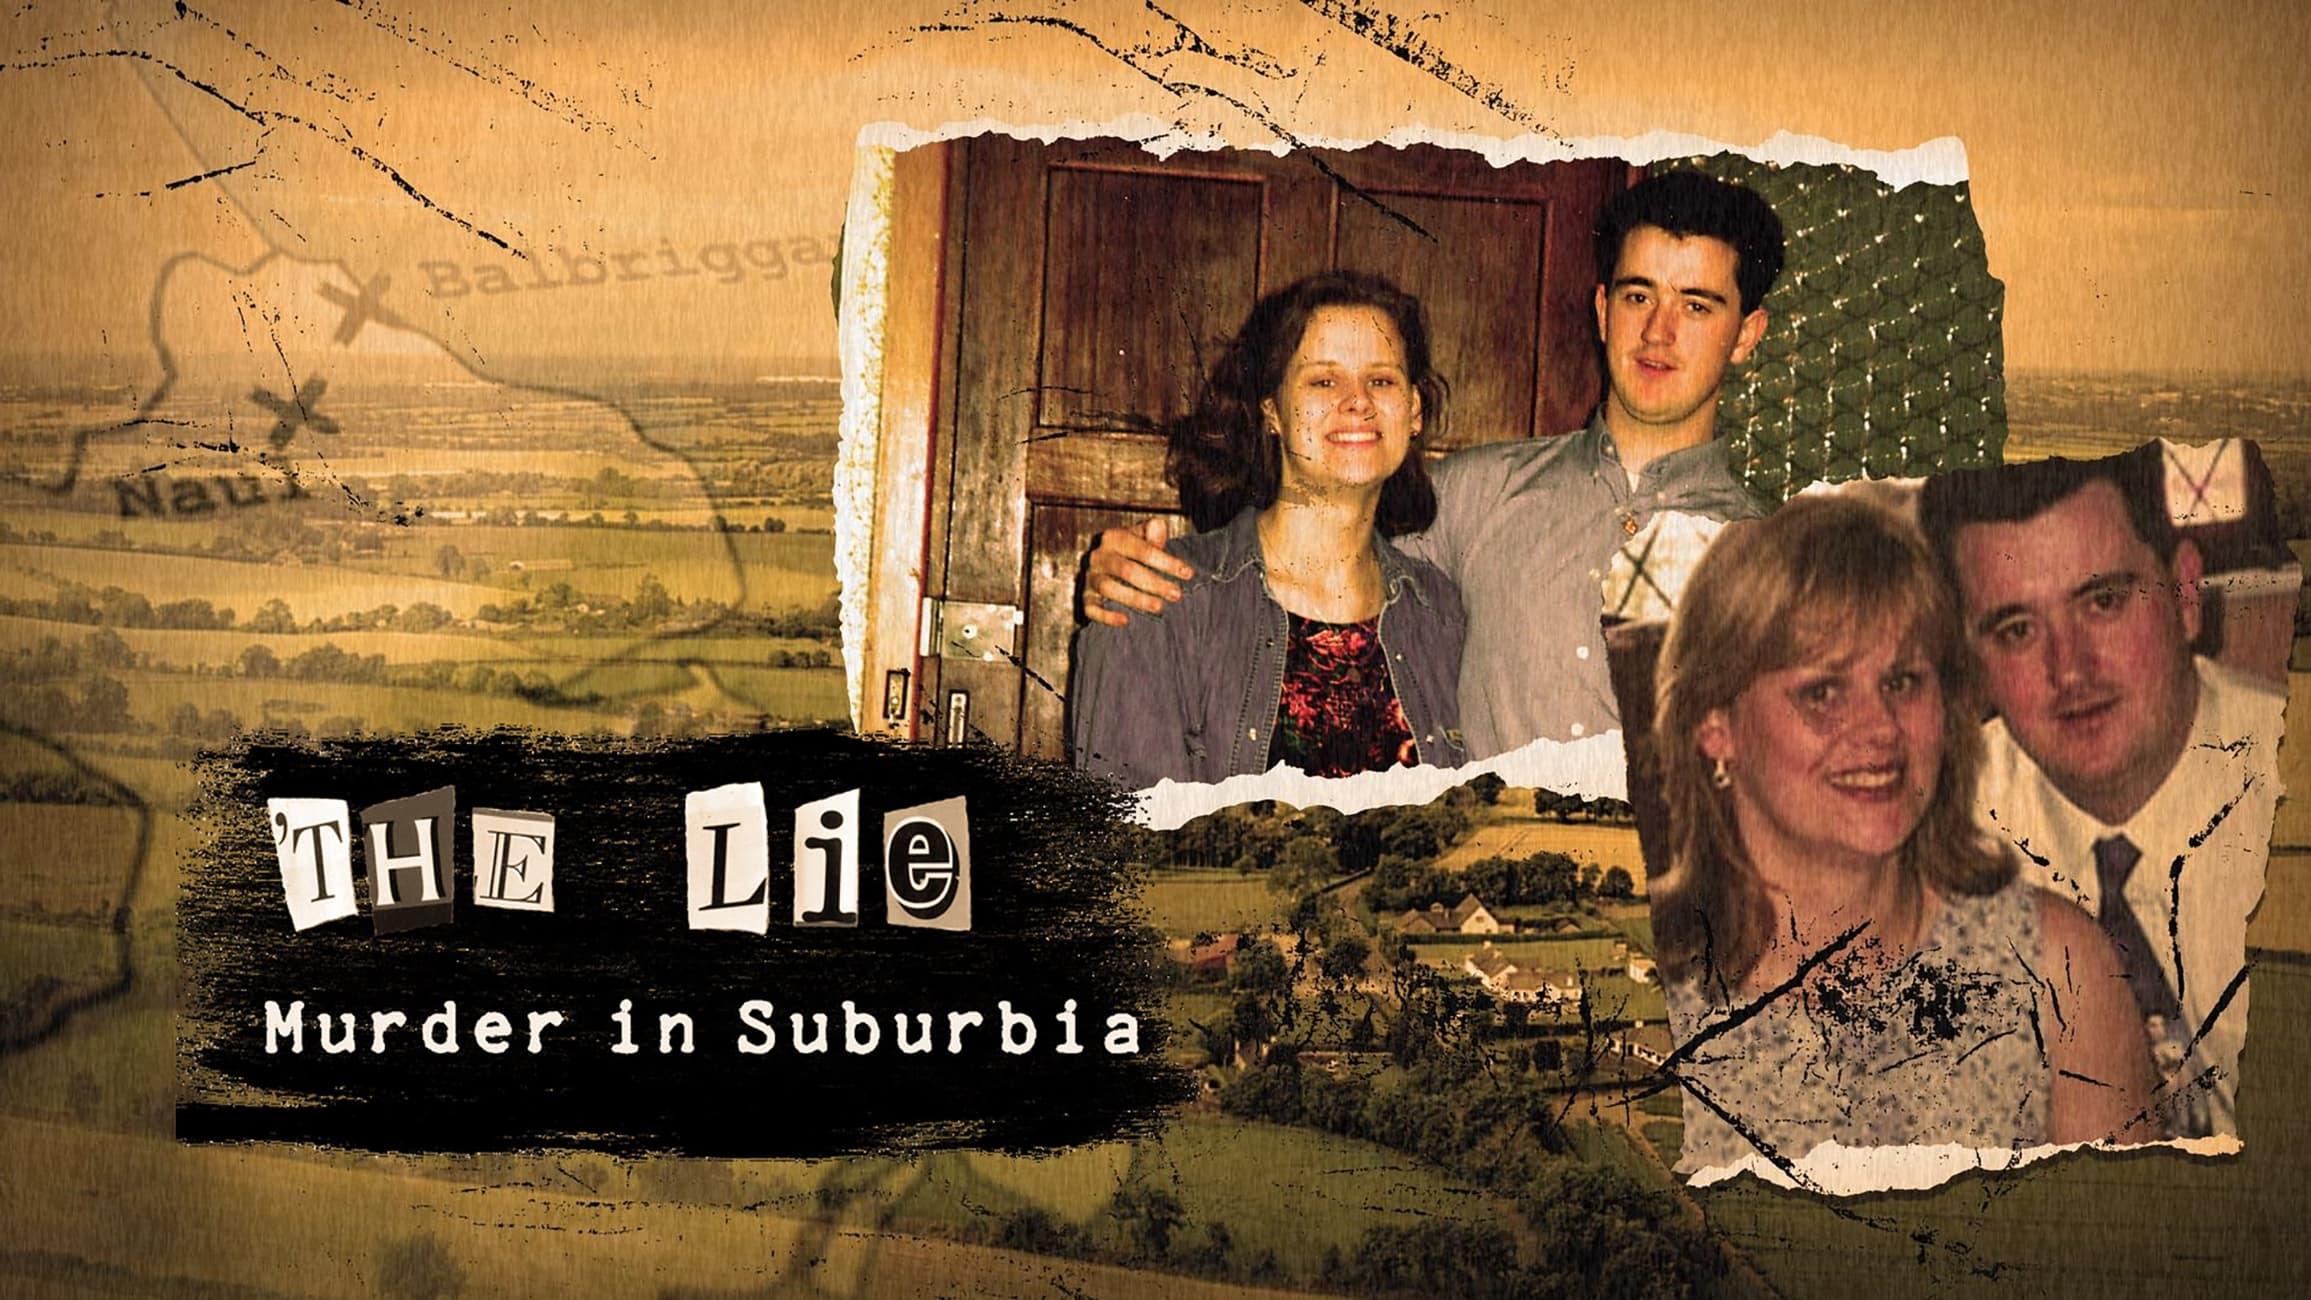 The Lie Murder in Suburbia backdrop